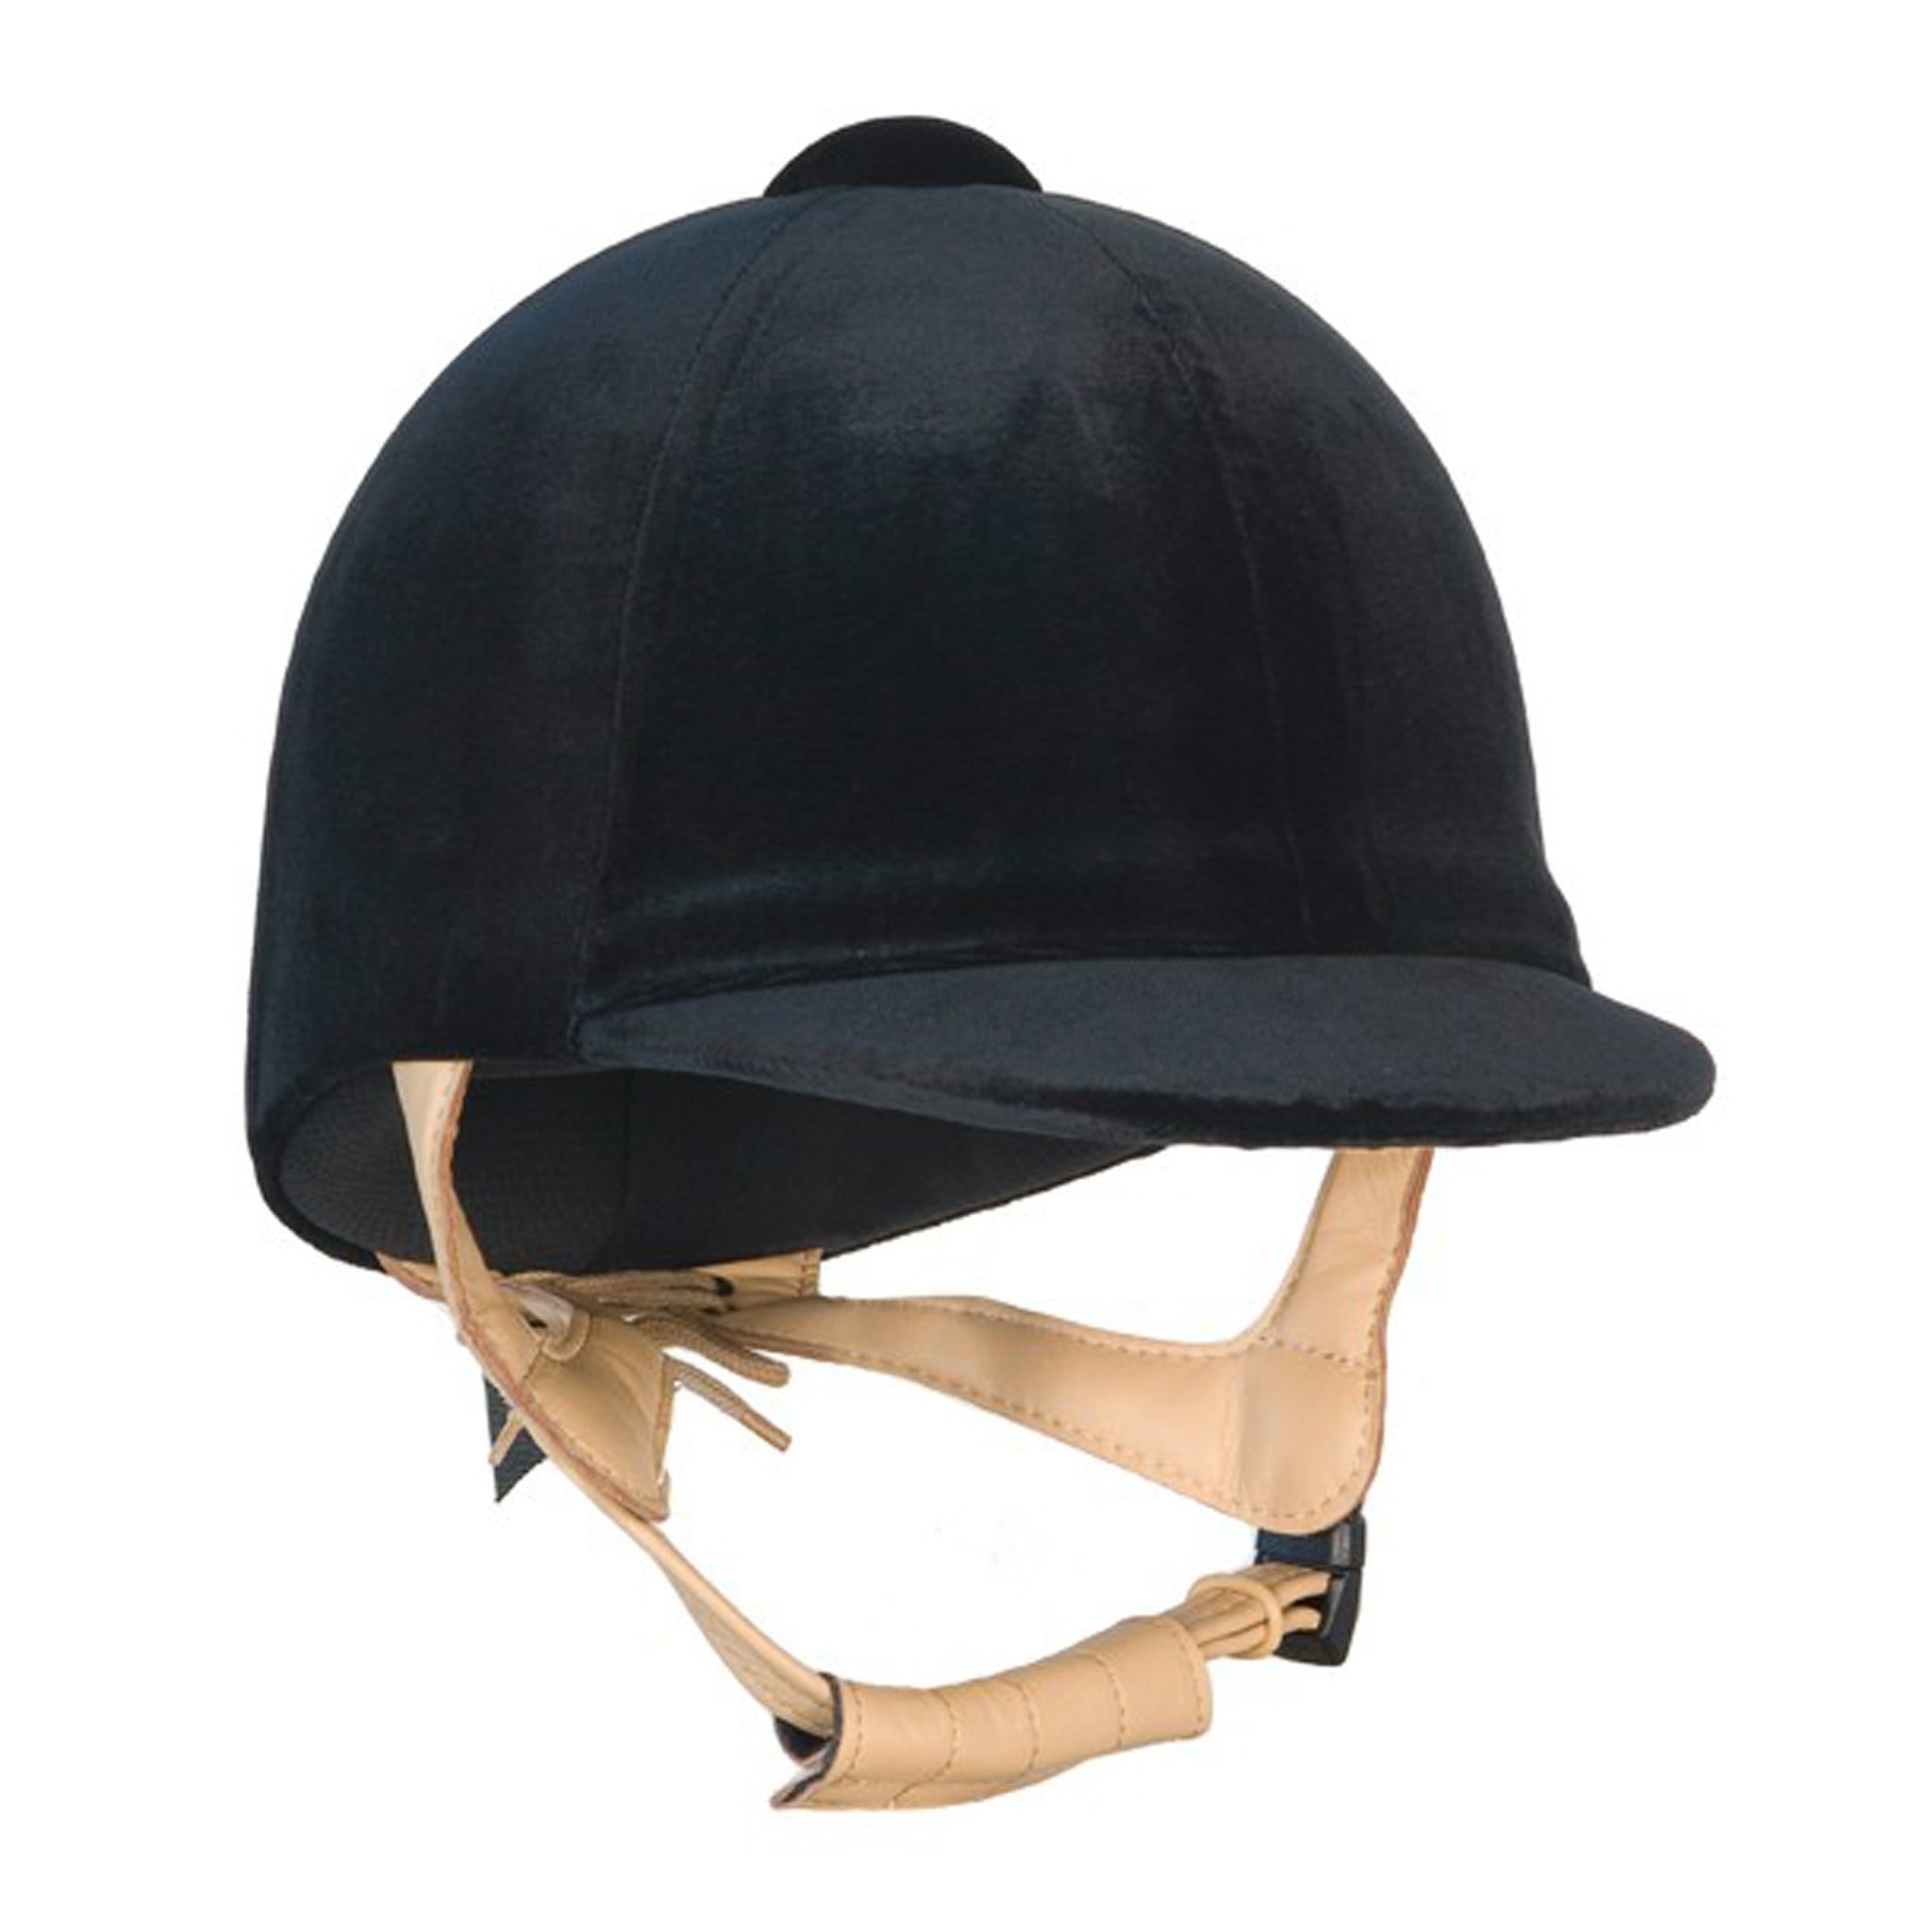 Champion CPX3000 Deluxe Riding Hat Black CPX3000DELUXE/BK/51.